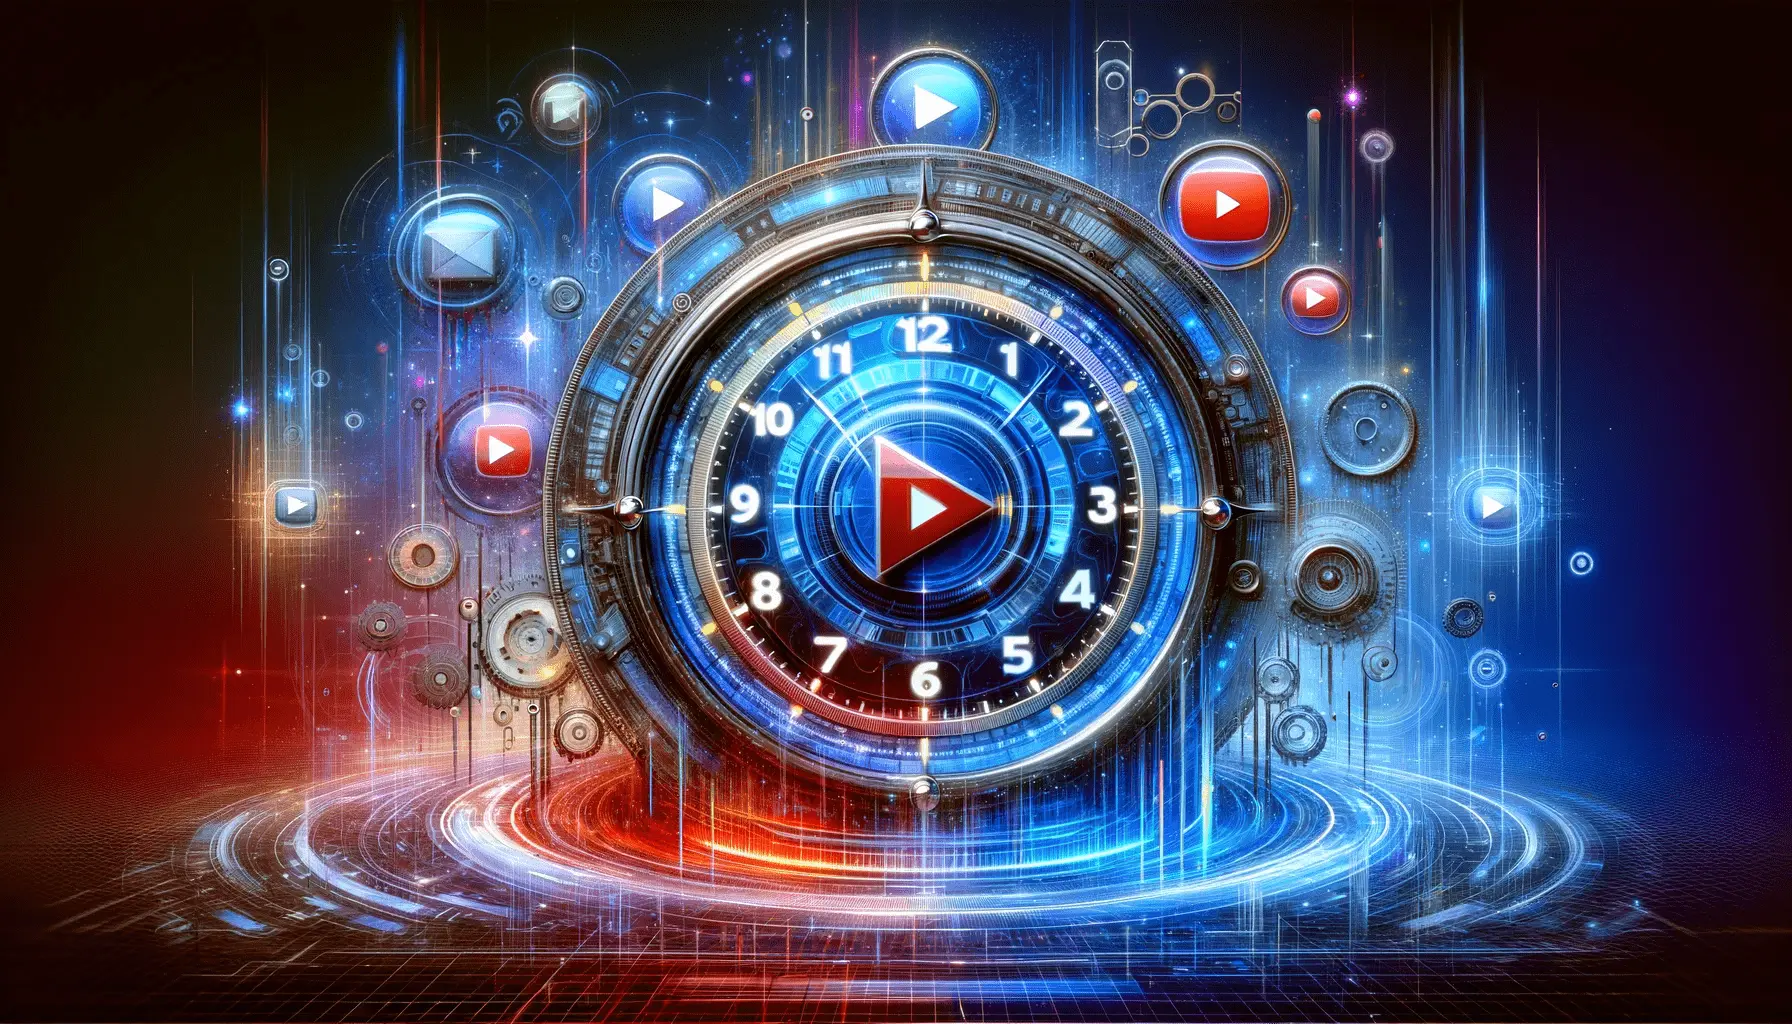 5 Ad Timing Secrets for YouTube Campaigns